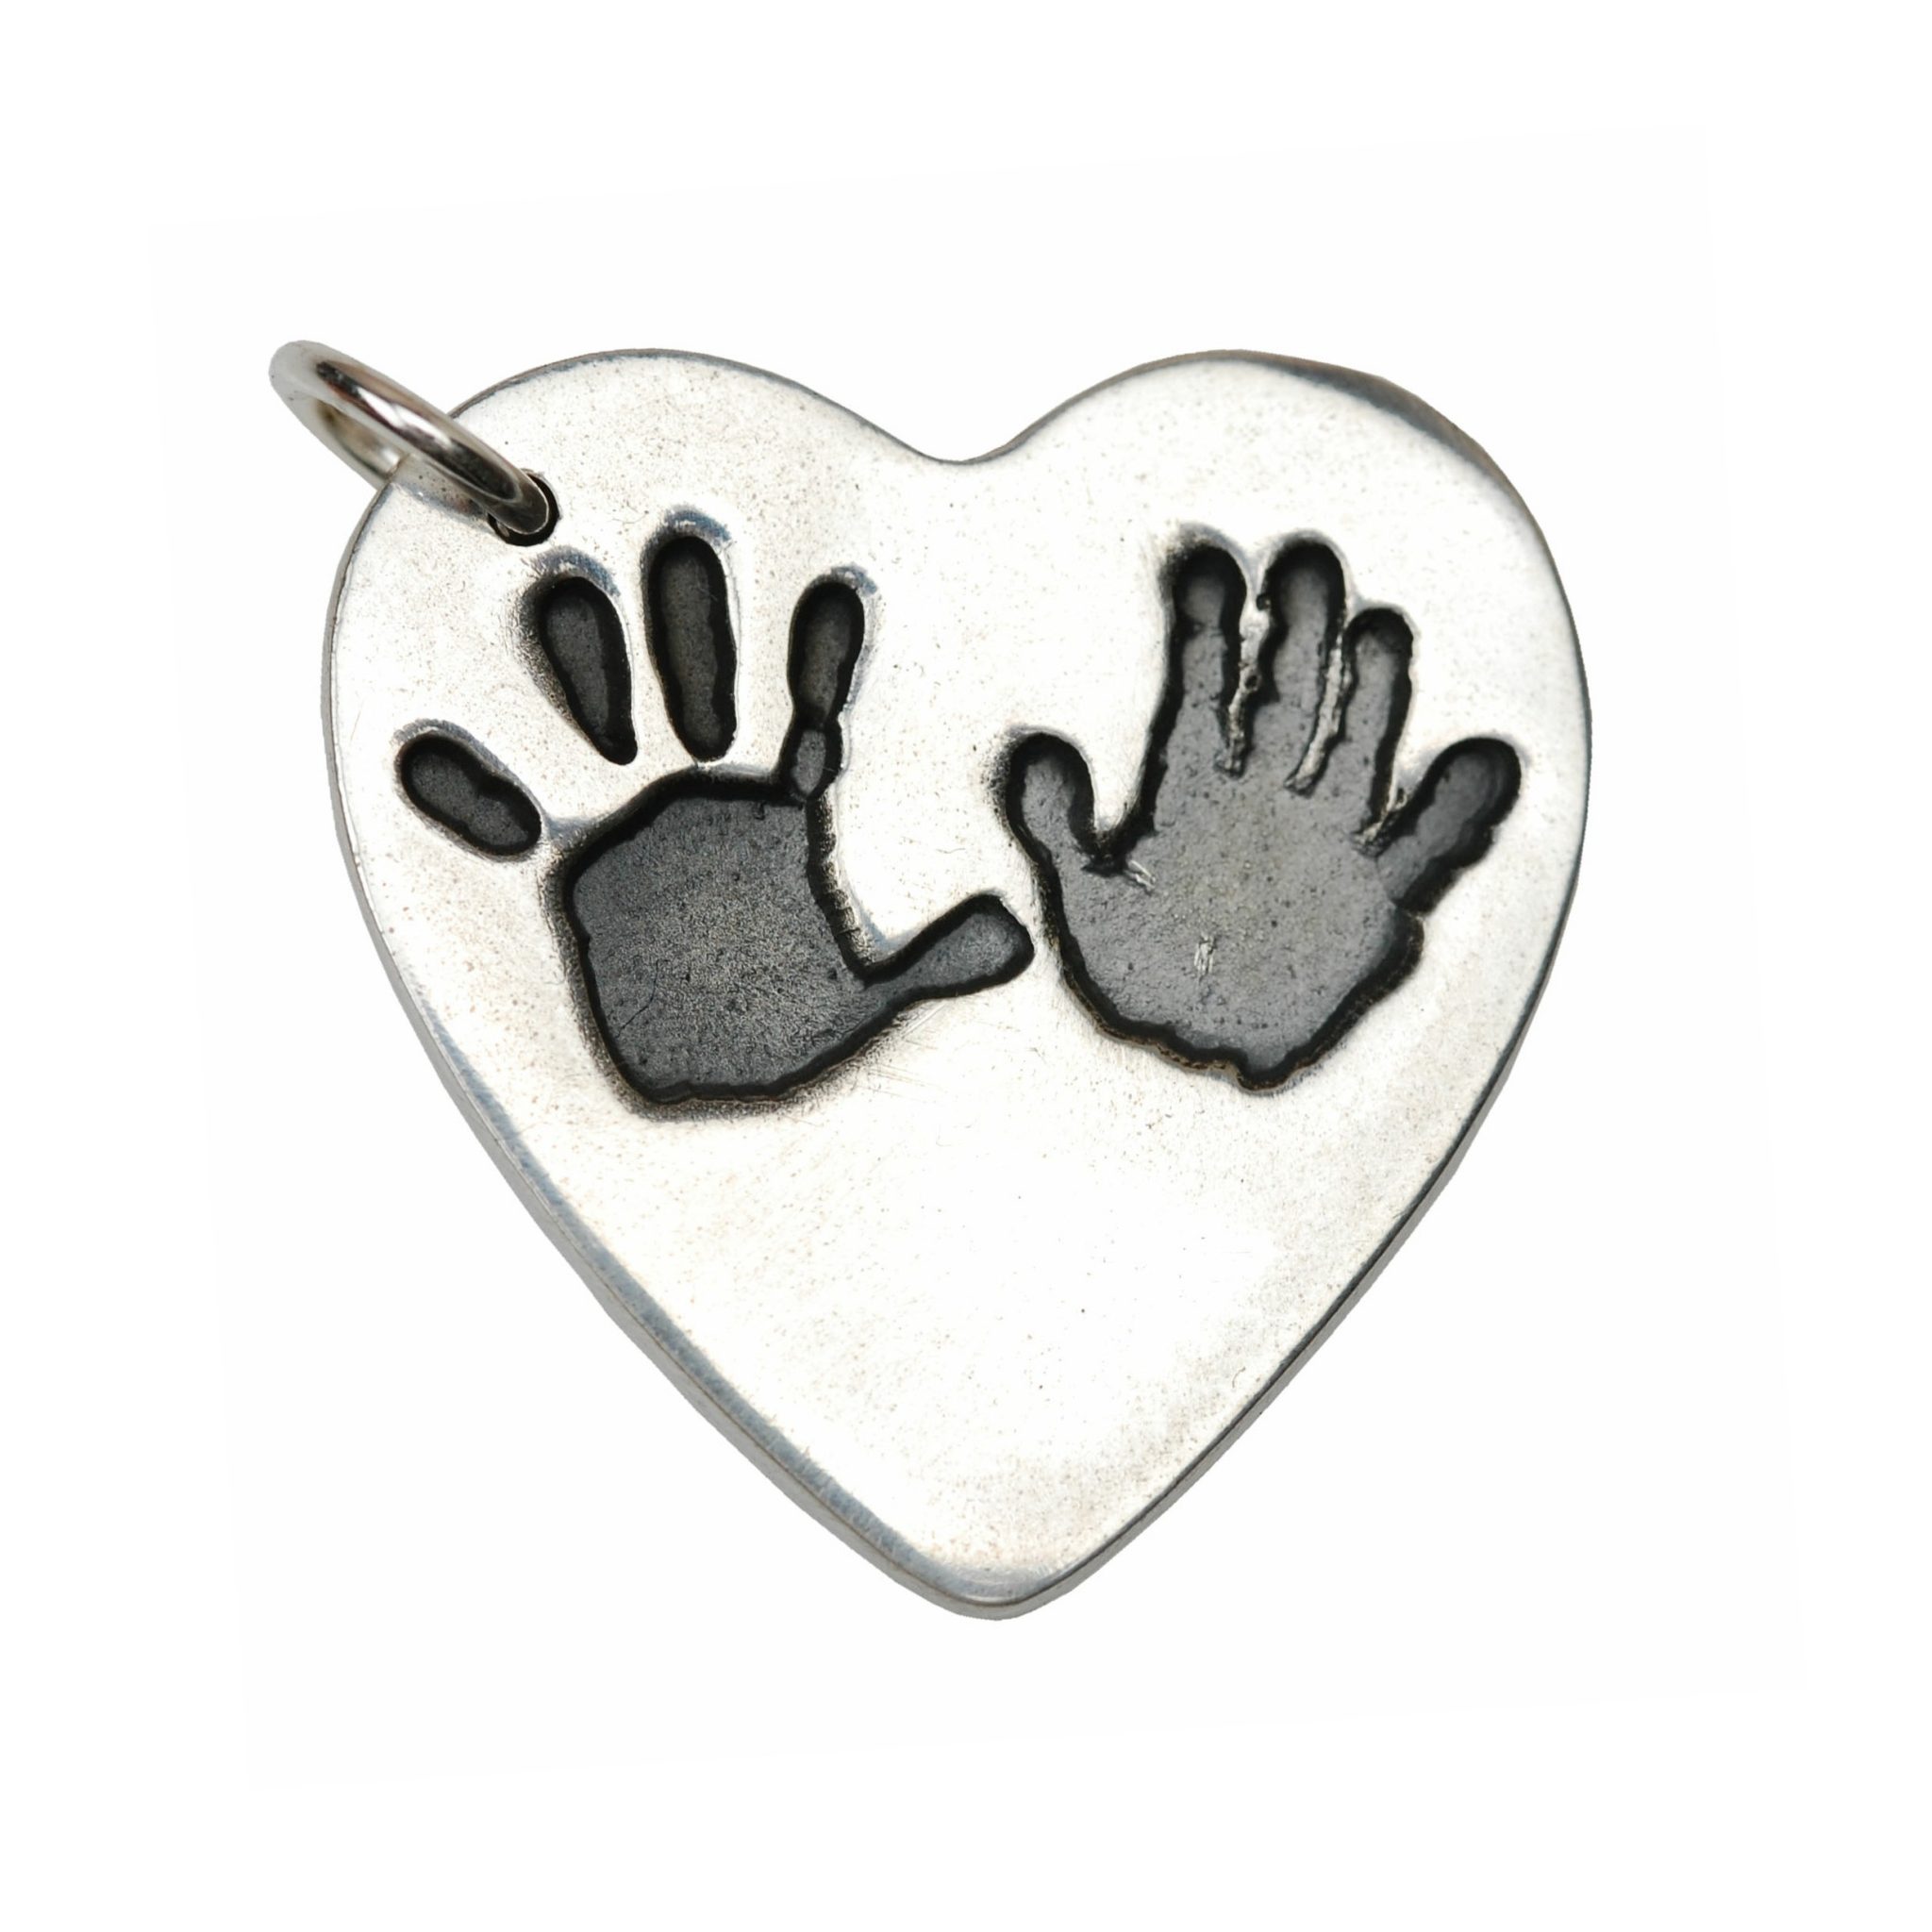 Large silver heart charm with hand prints